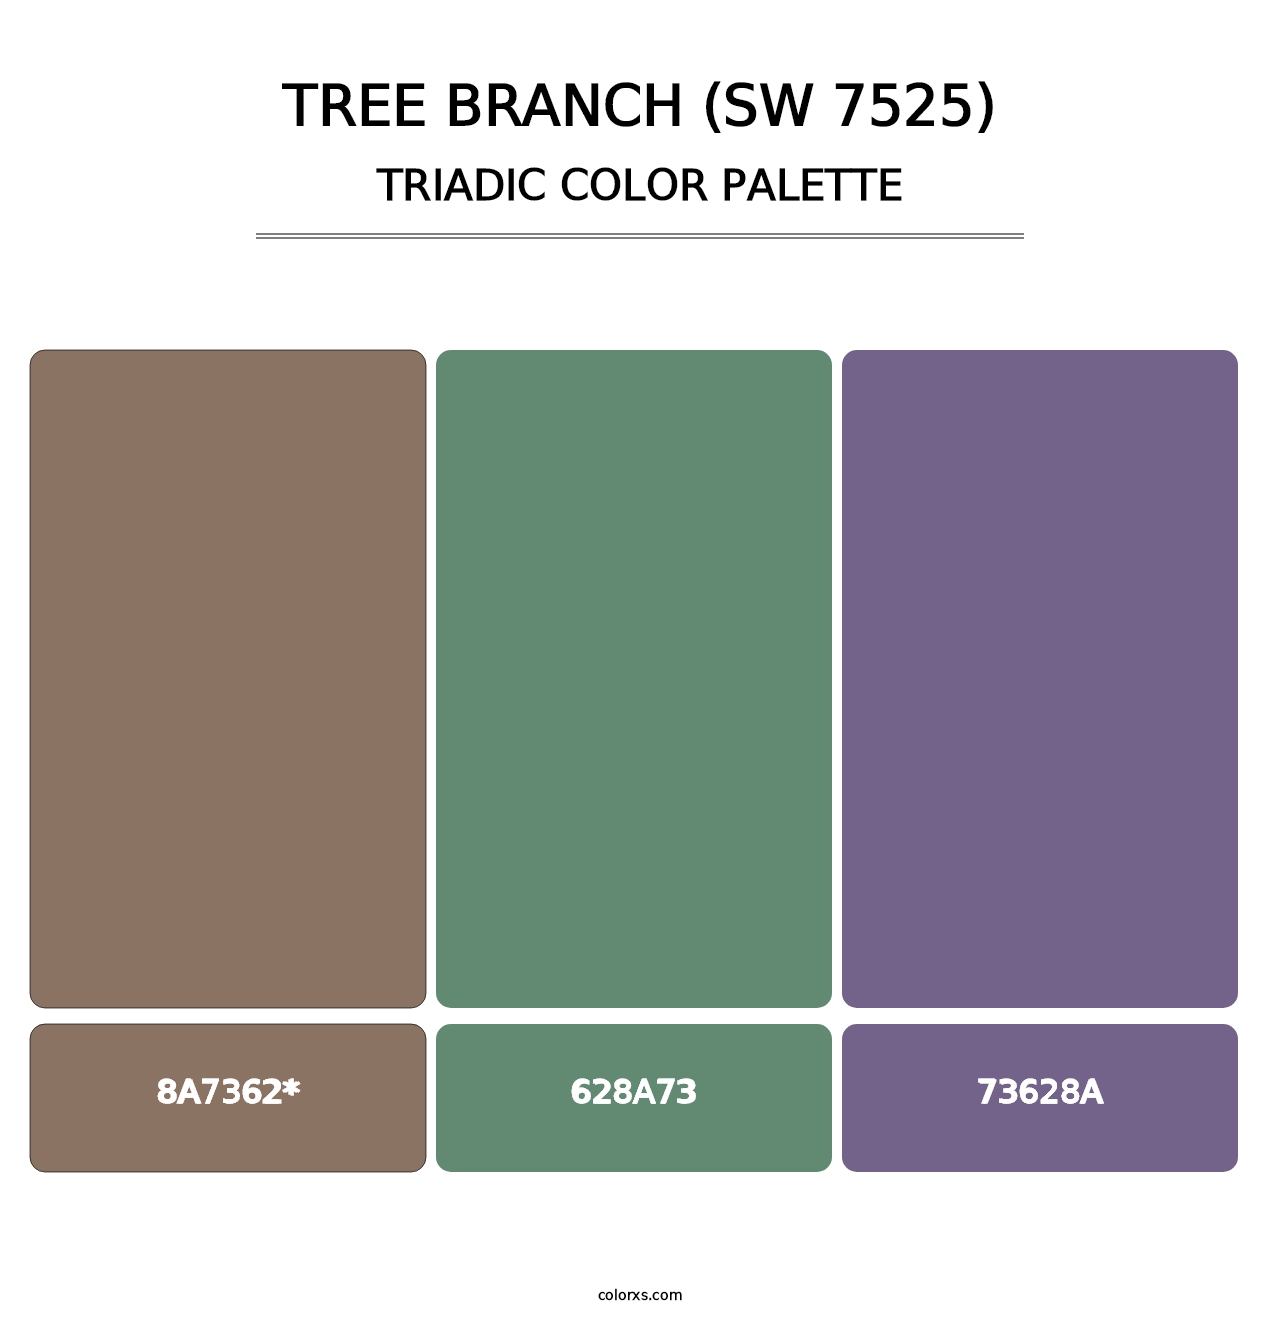 Tree Branch (SW 7525) - Triadic Color Palette